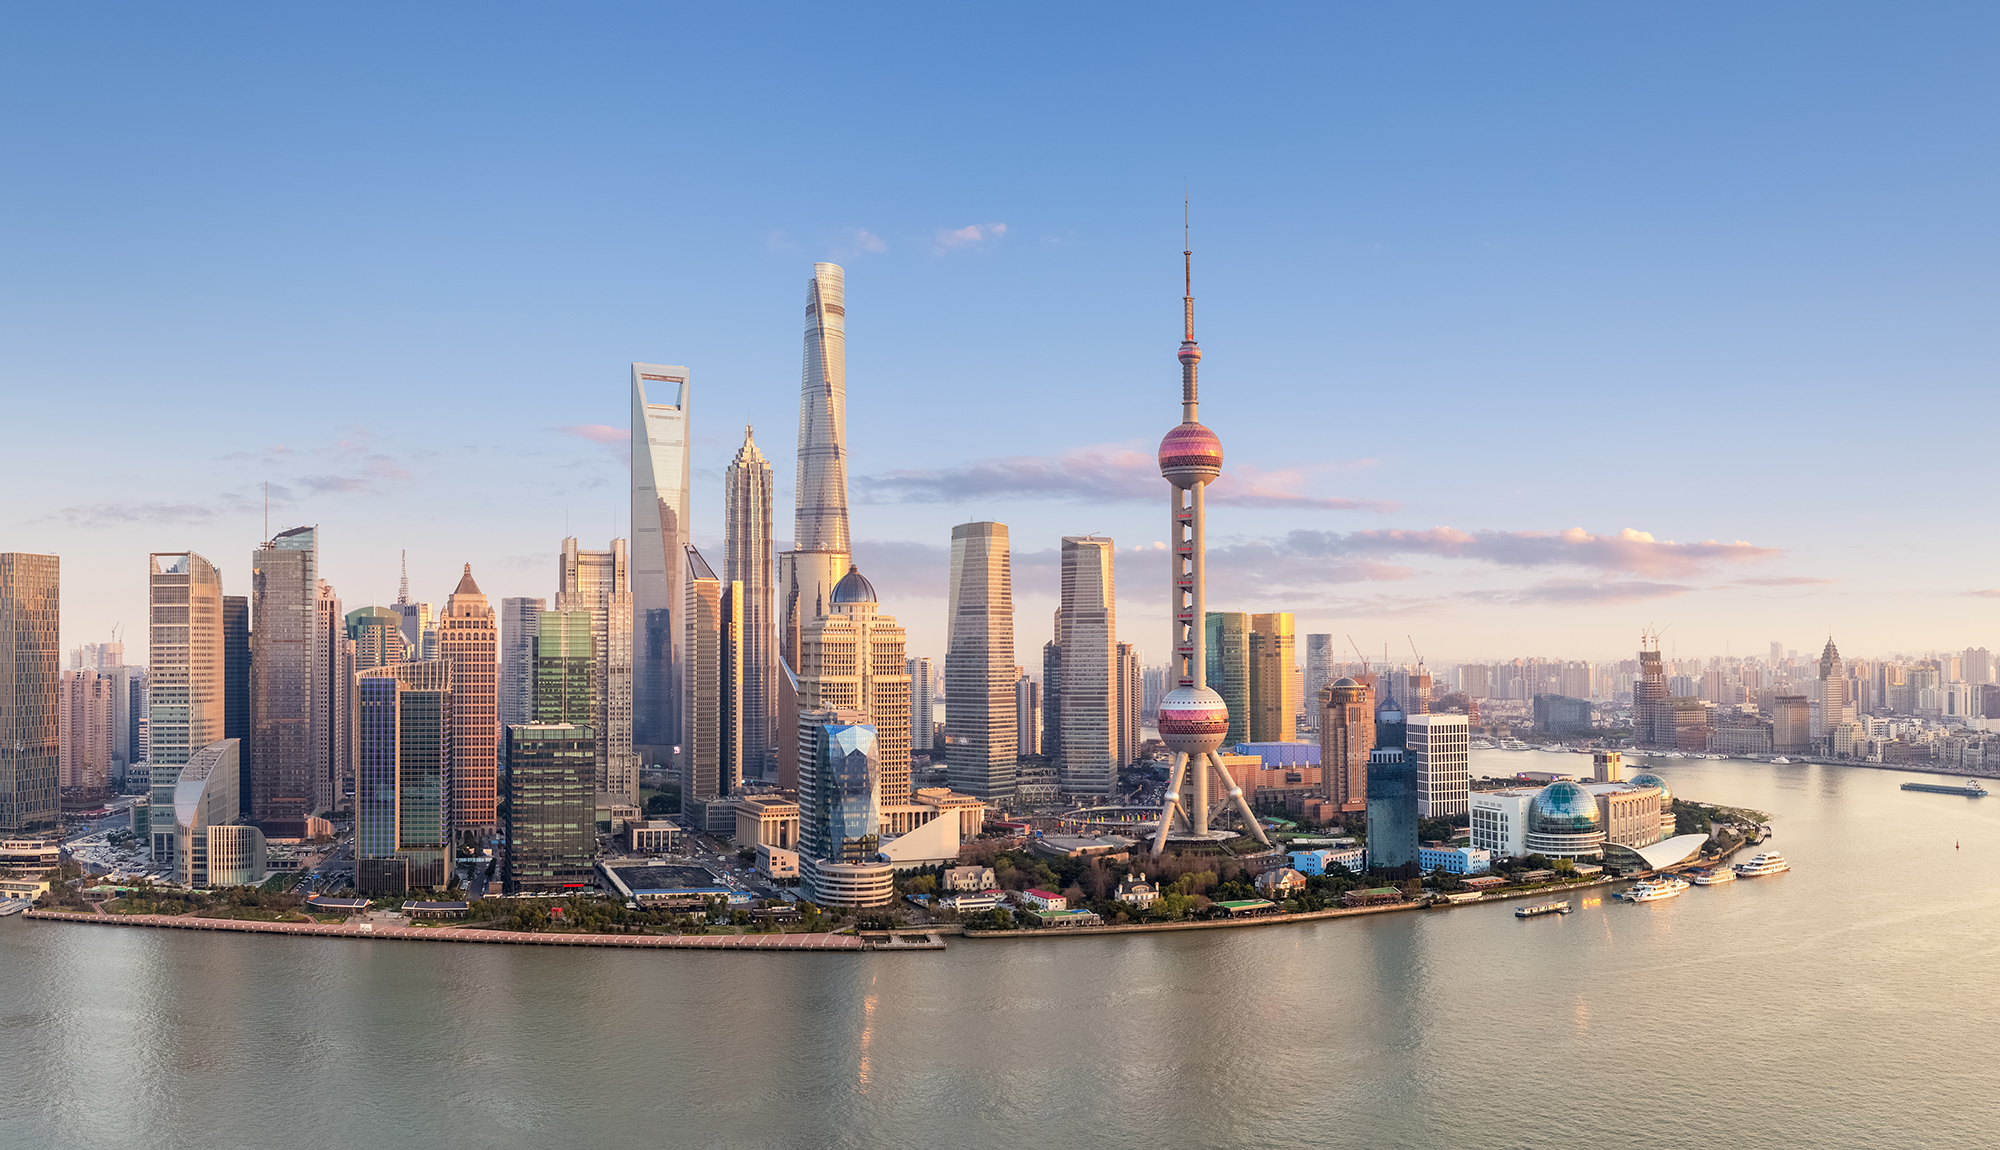 Shanghai's cityscape is dominated by the modern skyline and historic waterfront of the Bund